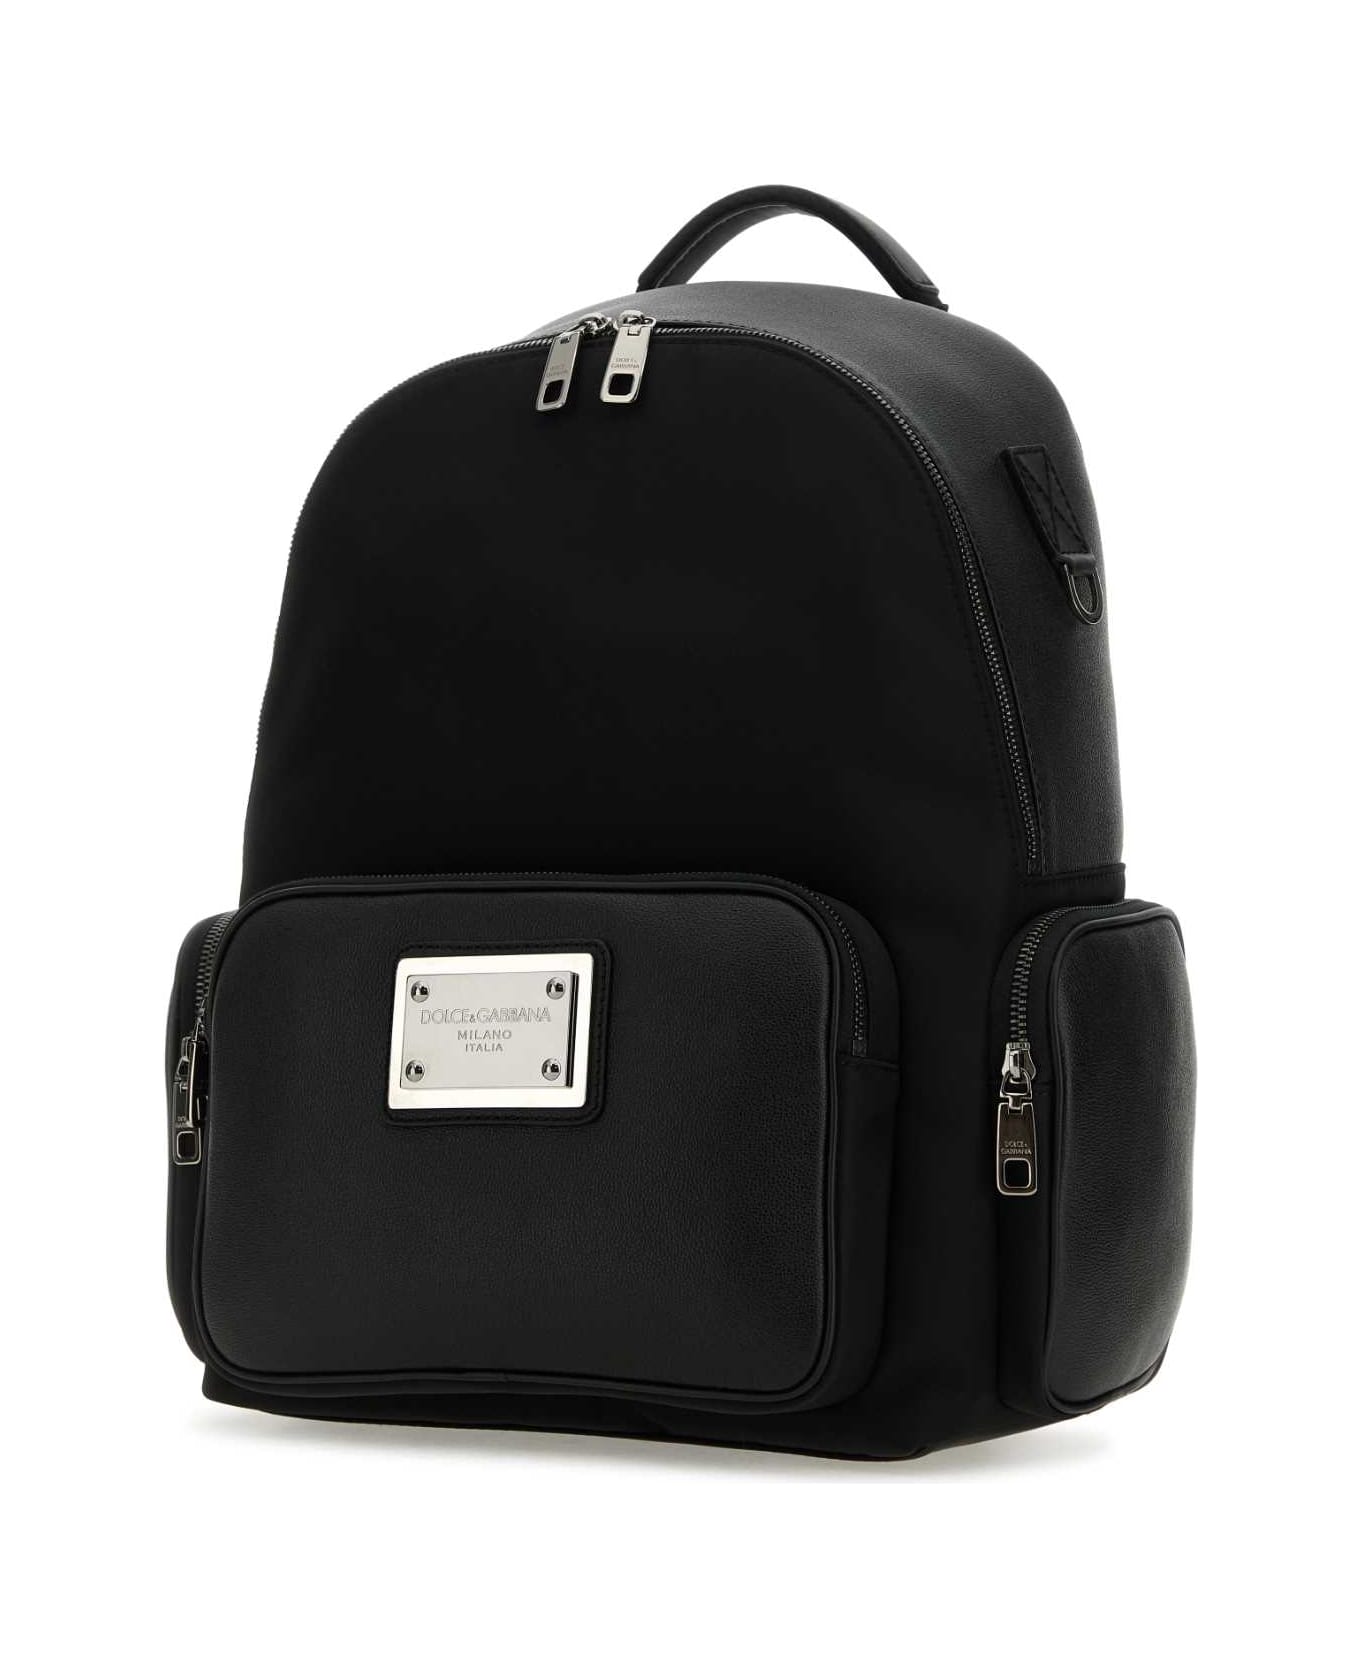 Dolce & Gabbana Black Fabric And Leather Backpack - 8B956